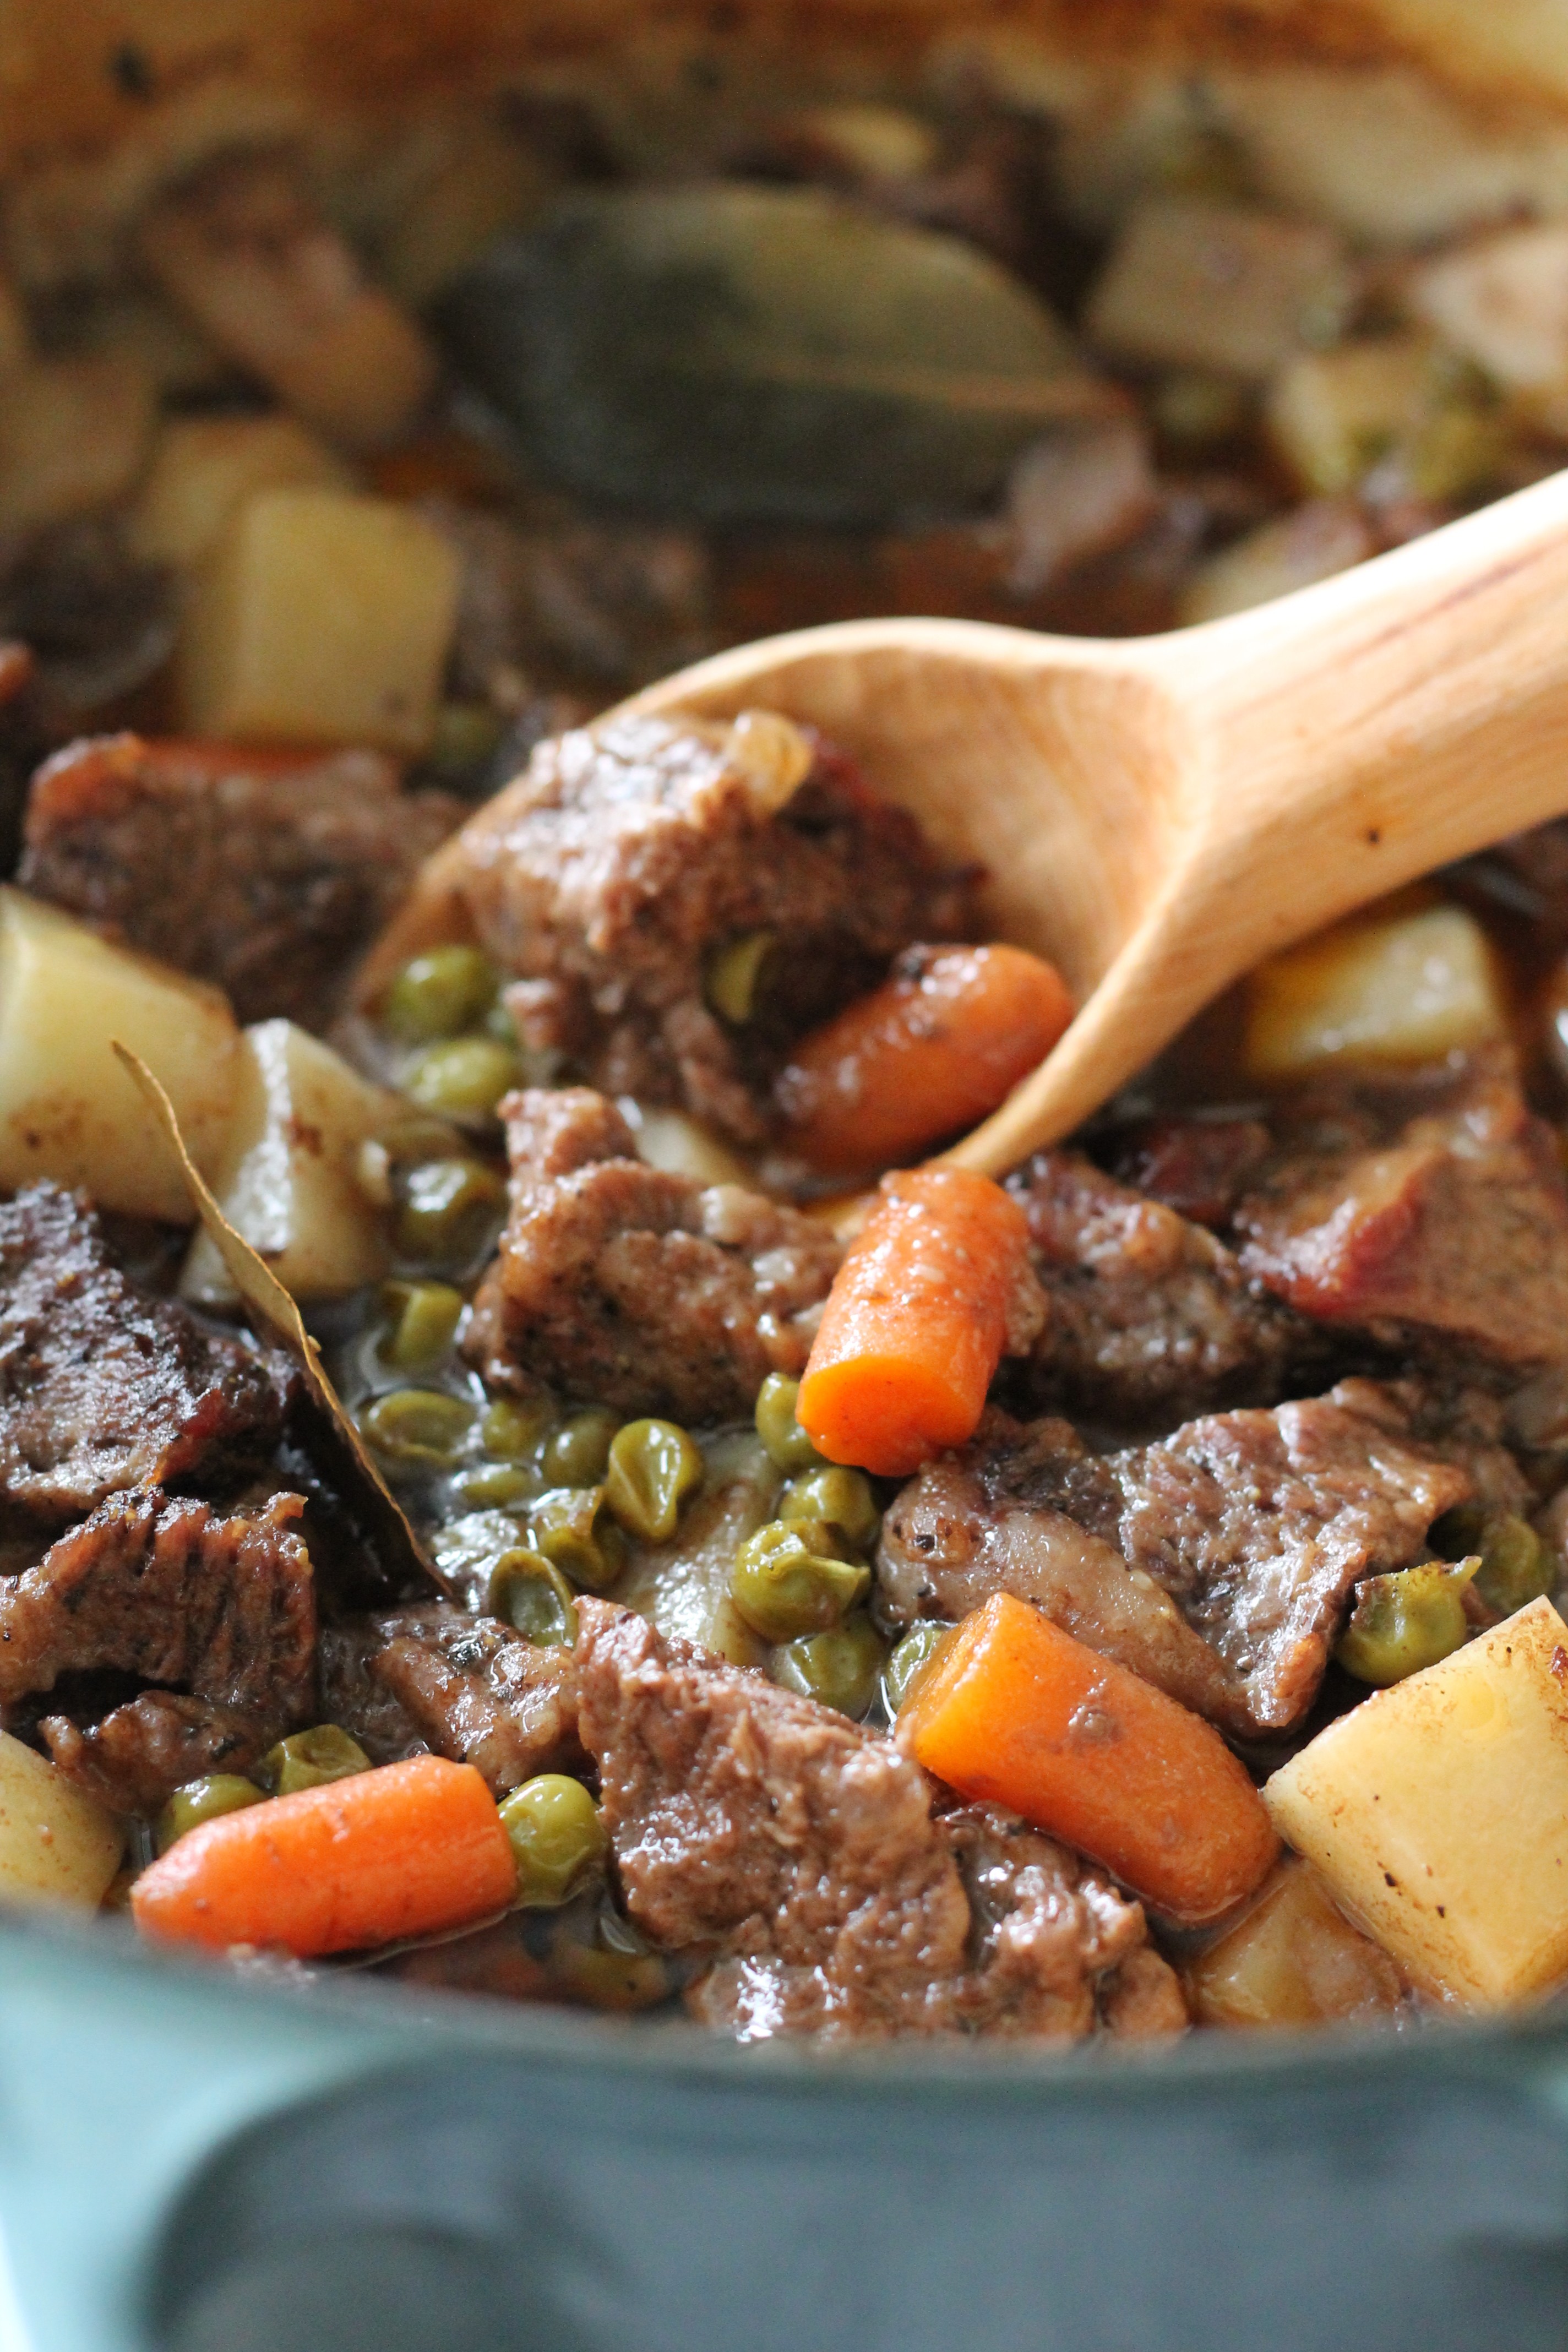 Beef Stew - so hearty and delicious!